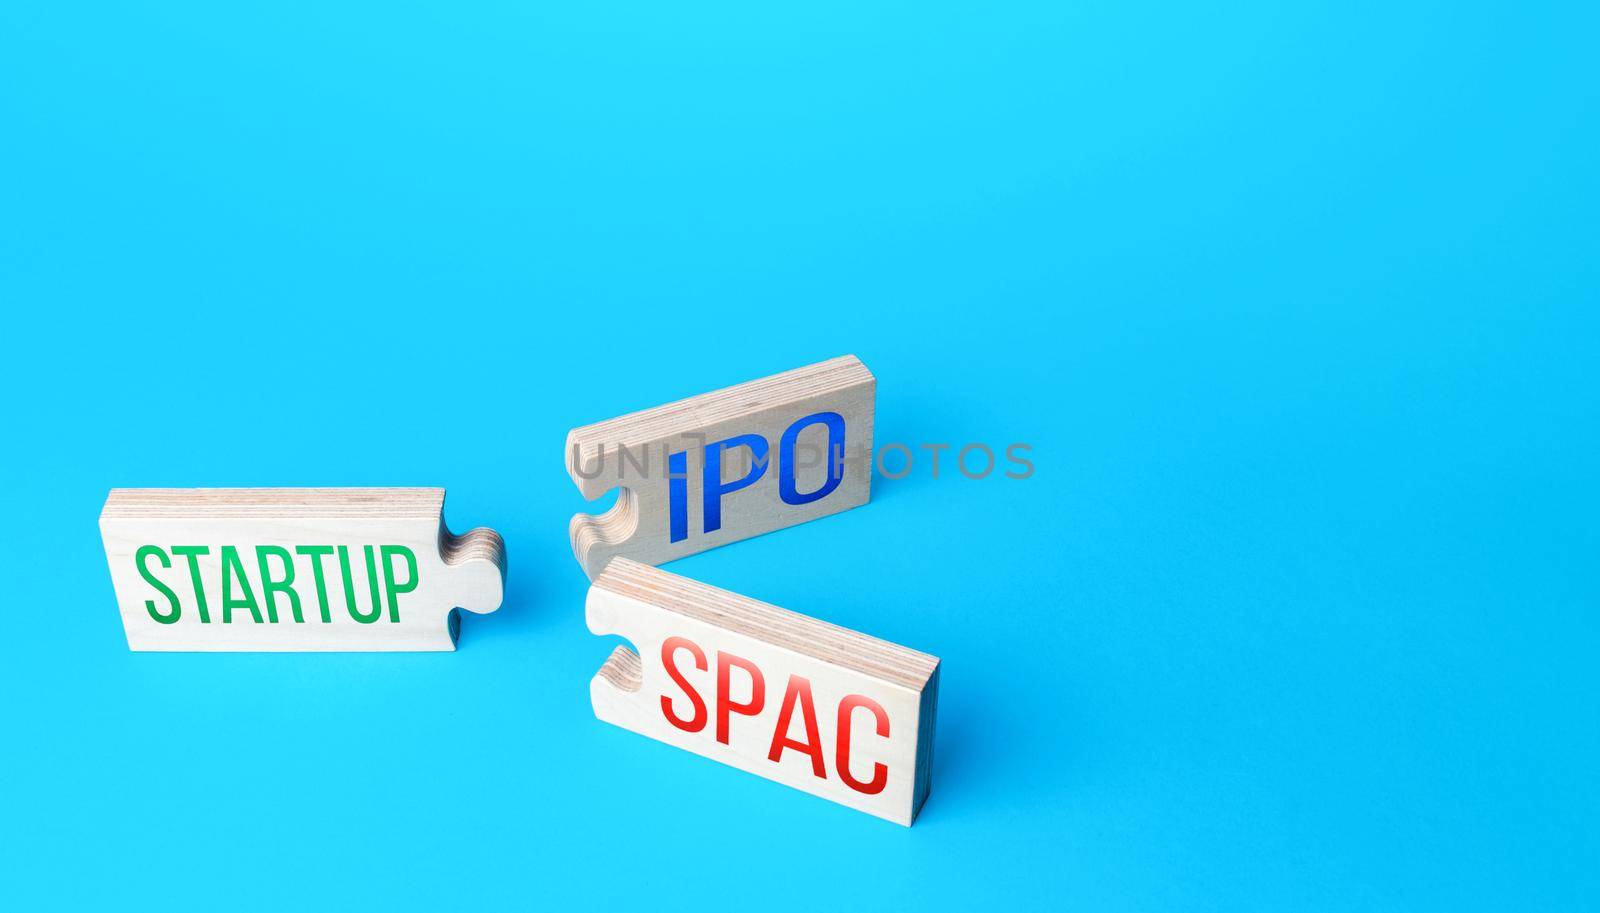 Choice between two puzzle connections. Simplified listing entry of a business startup to stock exchange using SPAC (Special purpose acquisition company) or IPO. Simplified listing of company by iLixe48